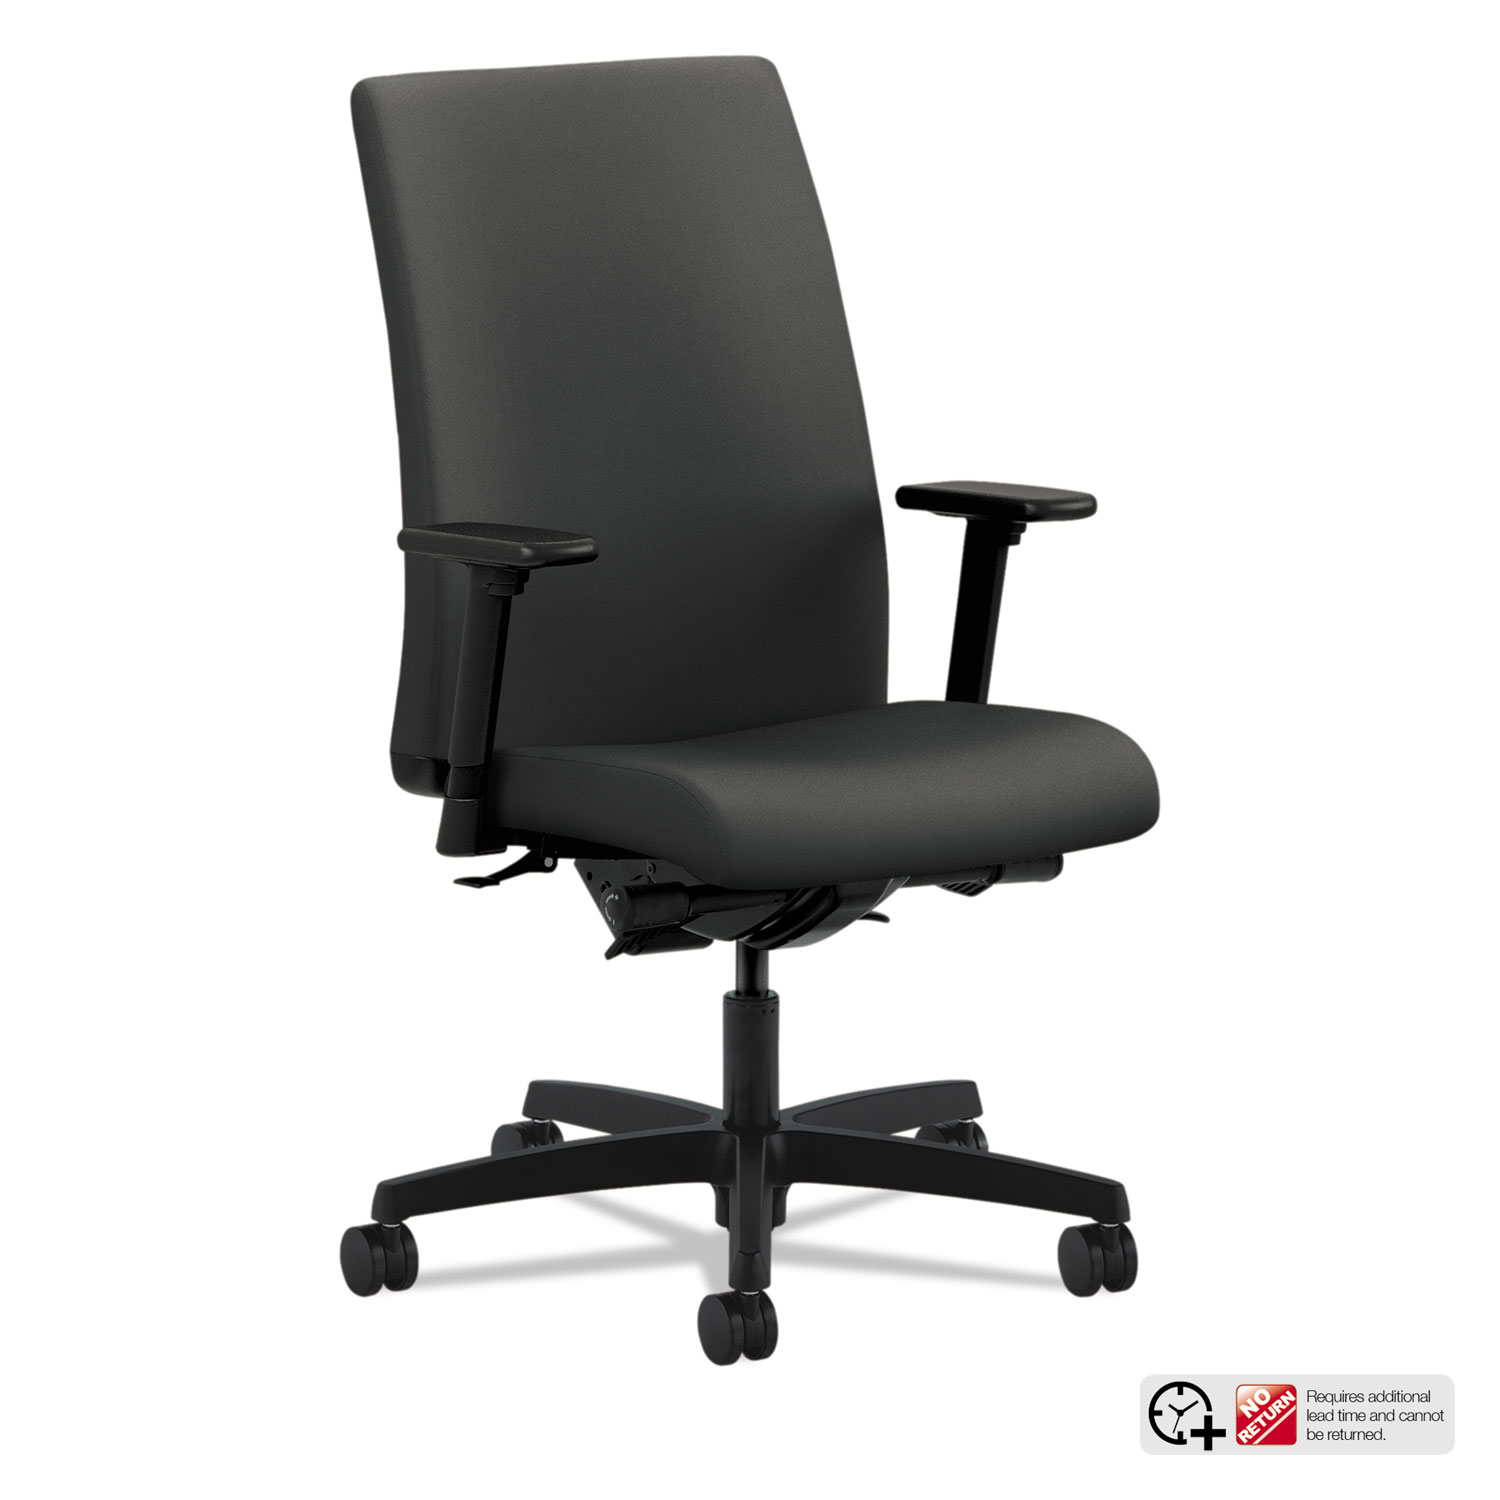  HON HIWM3.A.H.U.CU19.T.SB Ignition Series Mid-Back Work Chair, Supports up to 300 lbs., Iron Ore Seat/Iron Ore Back, Black Base (HONIW104CU19) 